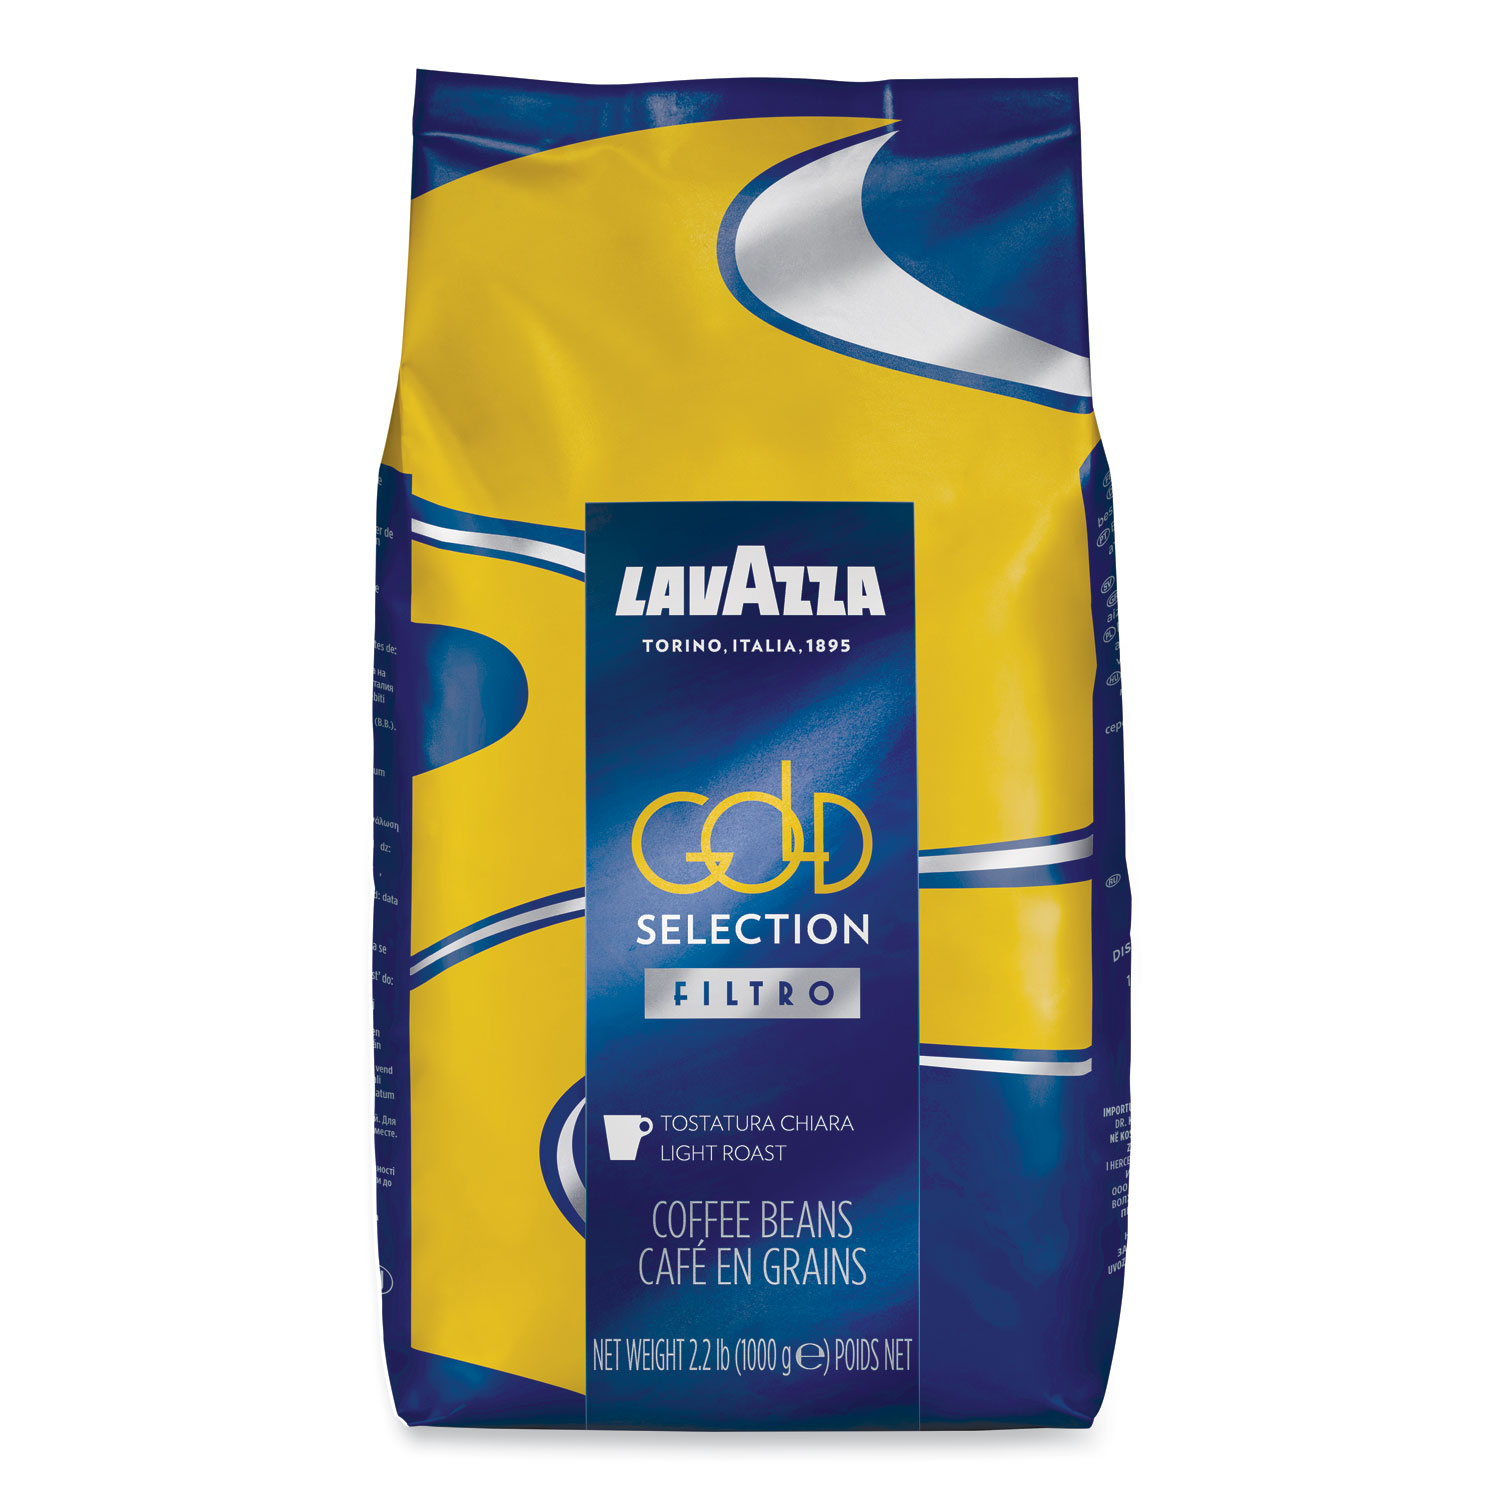  Lavazza 3427 Gold Selection Whole Bean Coffee, Light and Aromatic, 2.2 lb Bag (LAV3427) 